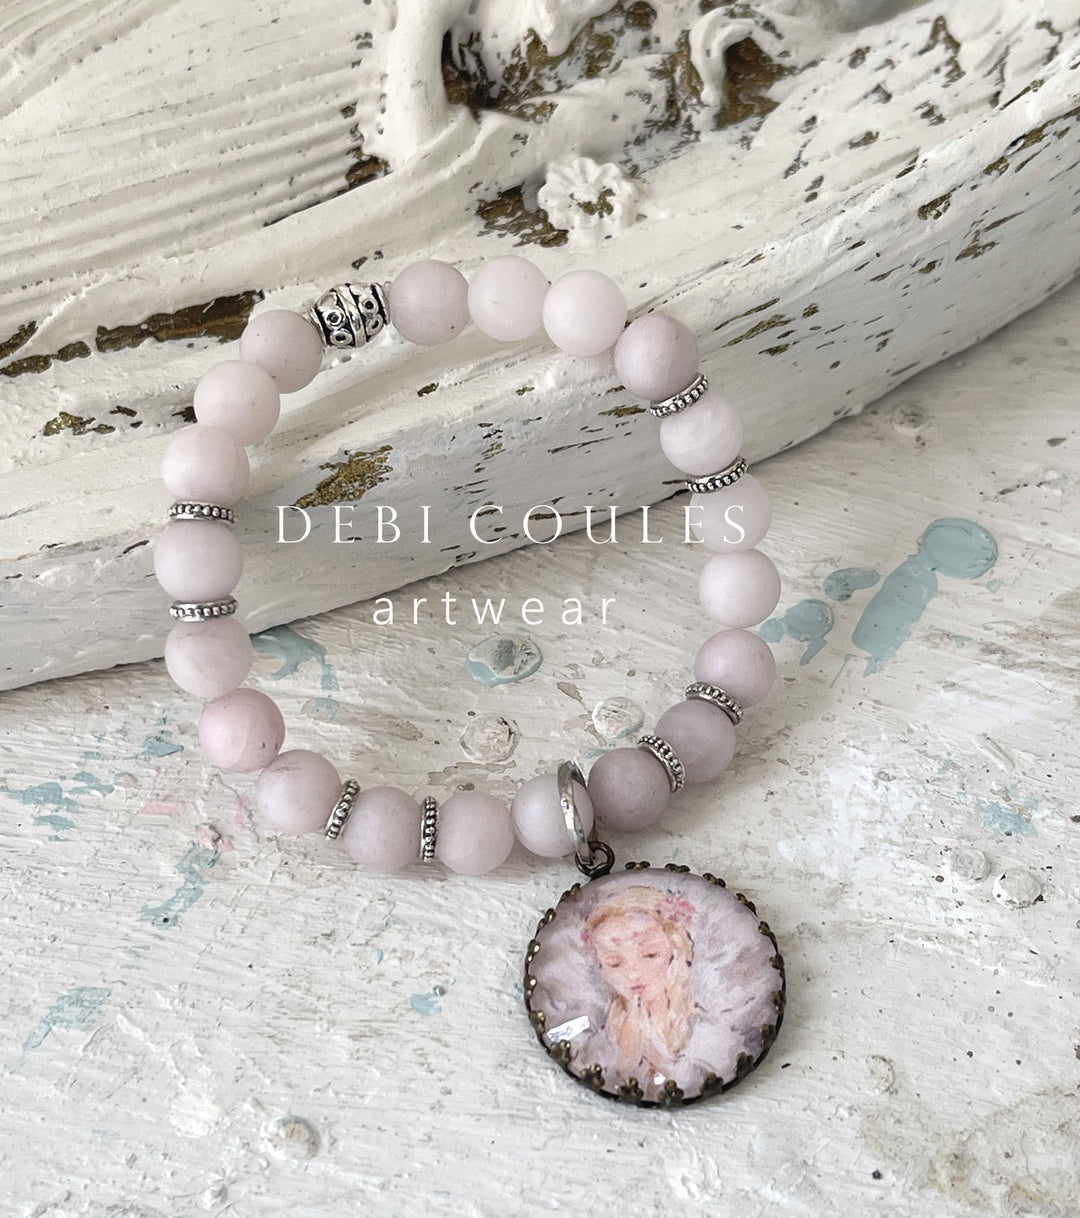 Angel bracelet with pink rose quartz and Tibetan Silver accents. Beautiful angel praying charm set in an antique bronze pronged charm. 